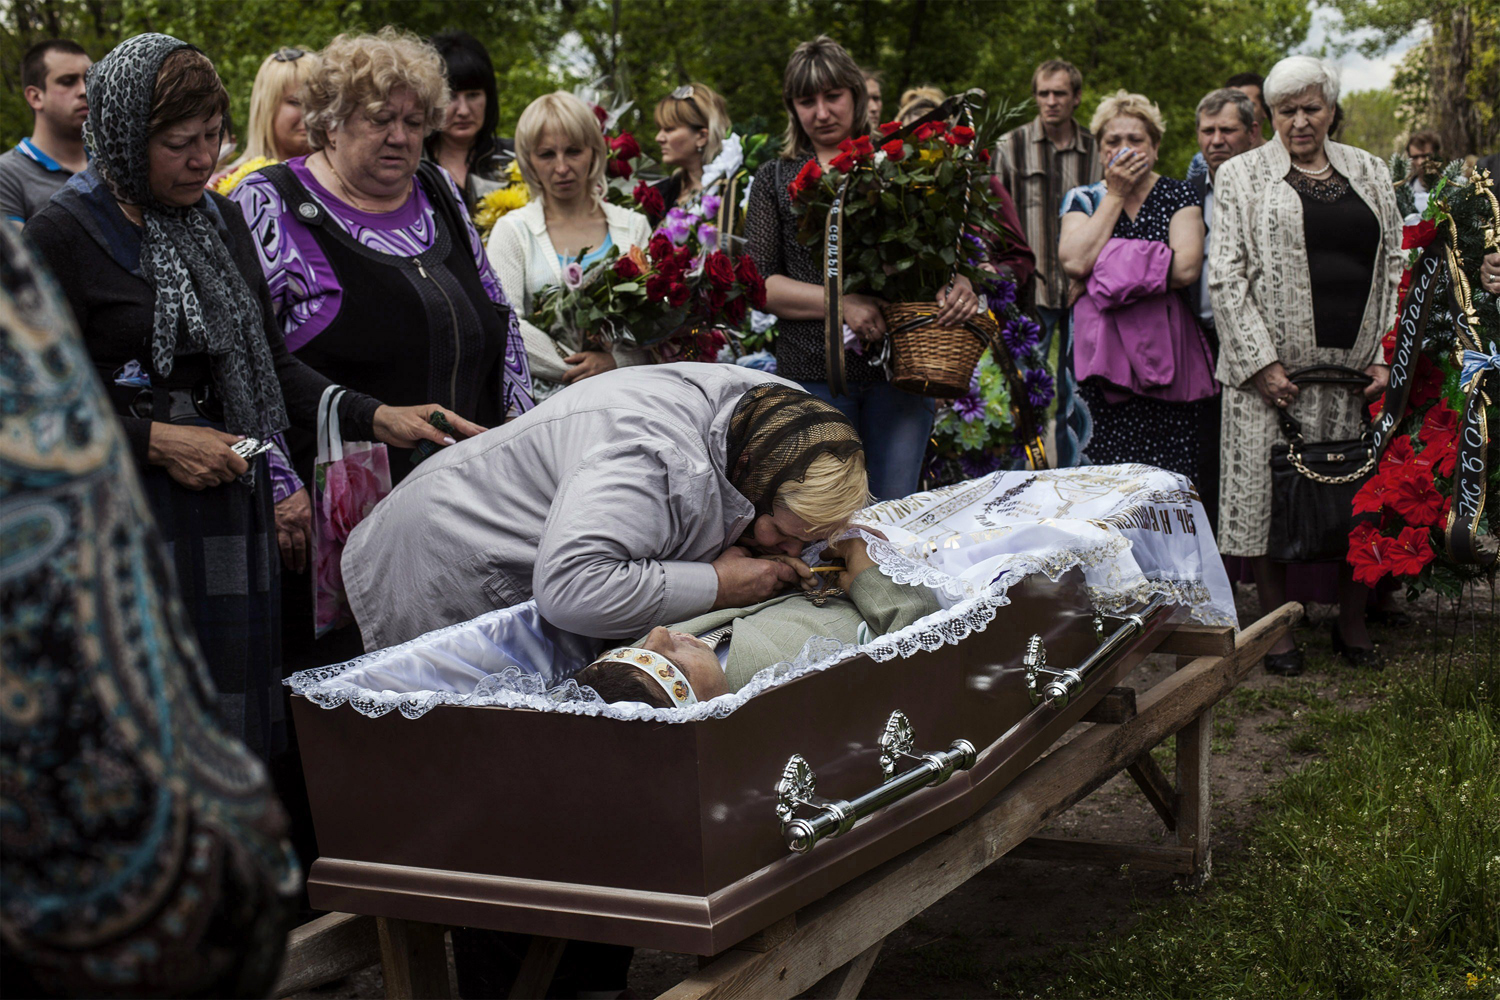 May 13, 2014. Relatives of Hyudych Vadim Yurievichq, including his mother, center, mourn his death, at the Krasnoarmeysk cemetery, eastern Ukraine, May 13, 2014. (Fabio Bucciarelli—AFP/Getty Images)